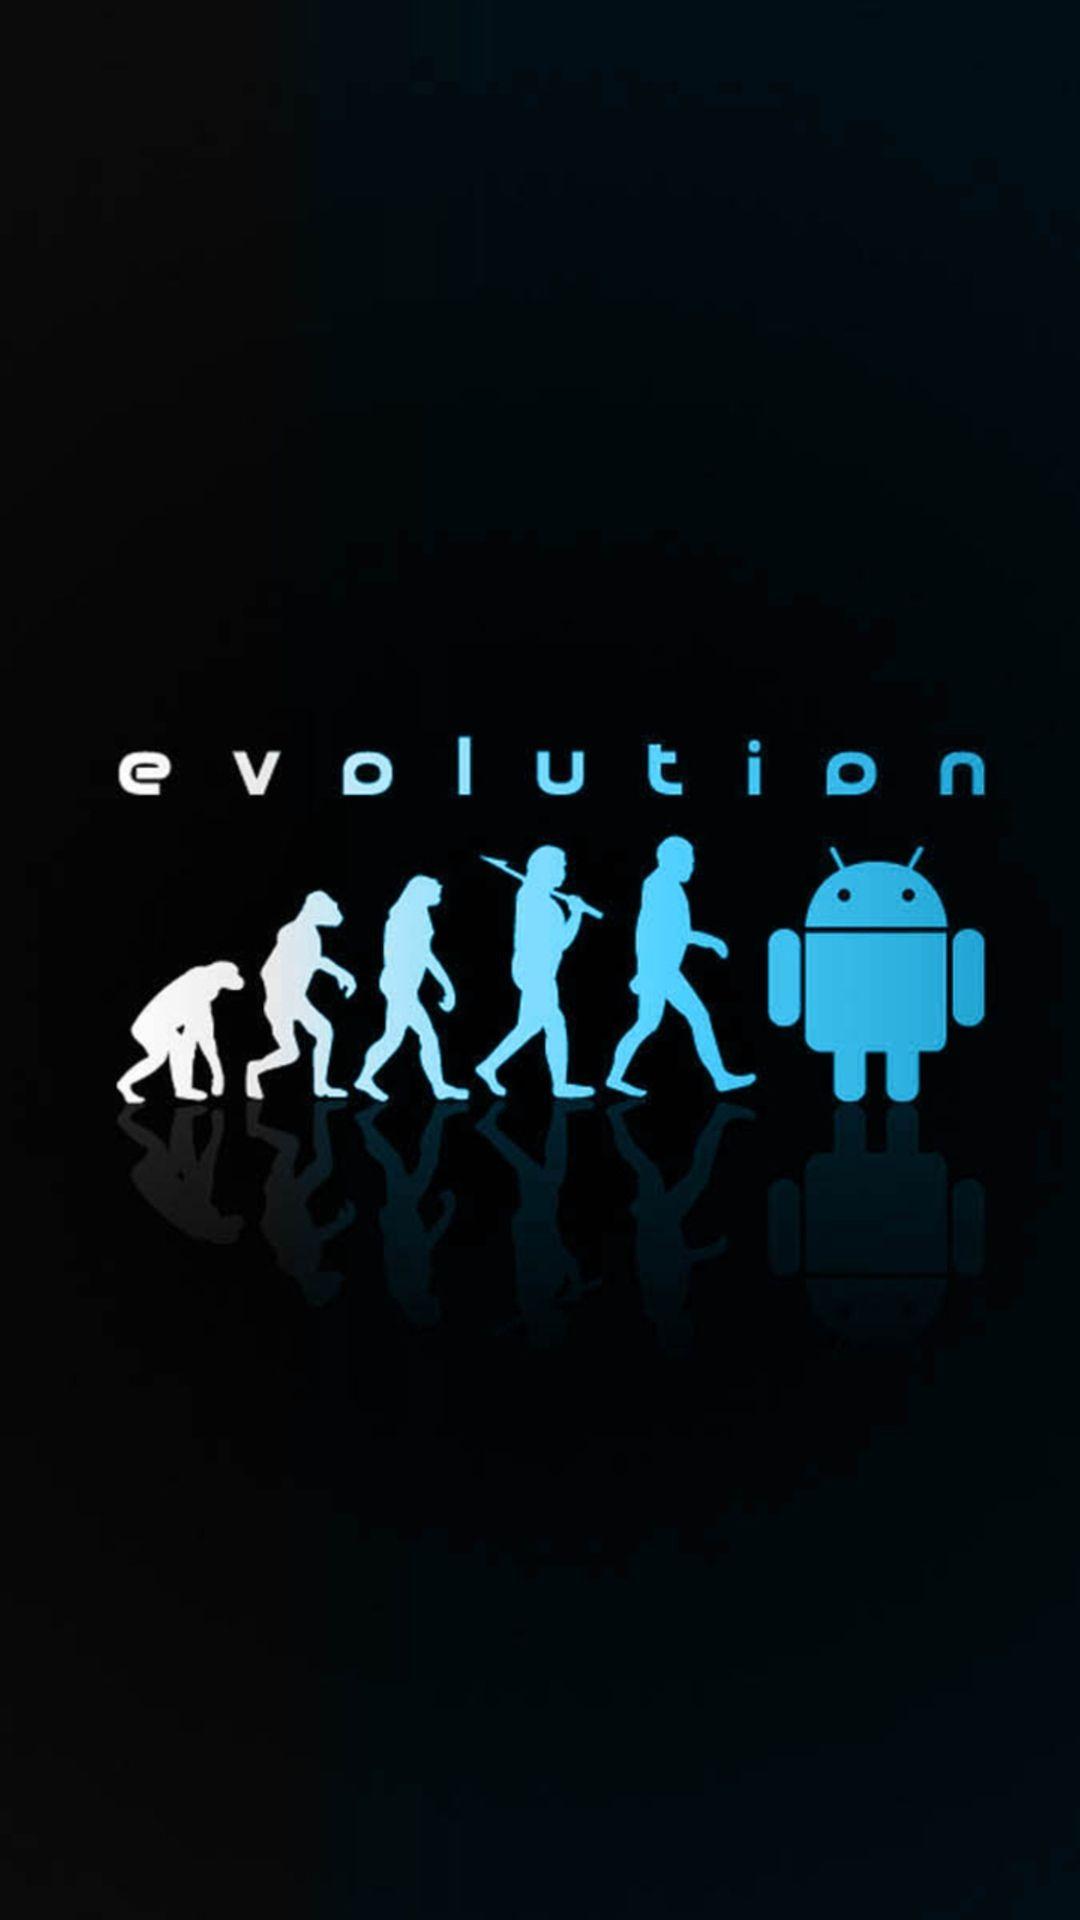 Android Evolution Smartphone Wallpaper HD ⋆ GetPhotos